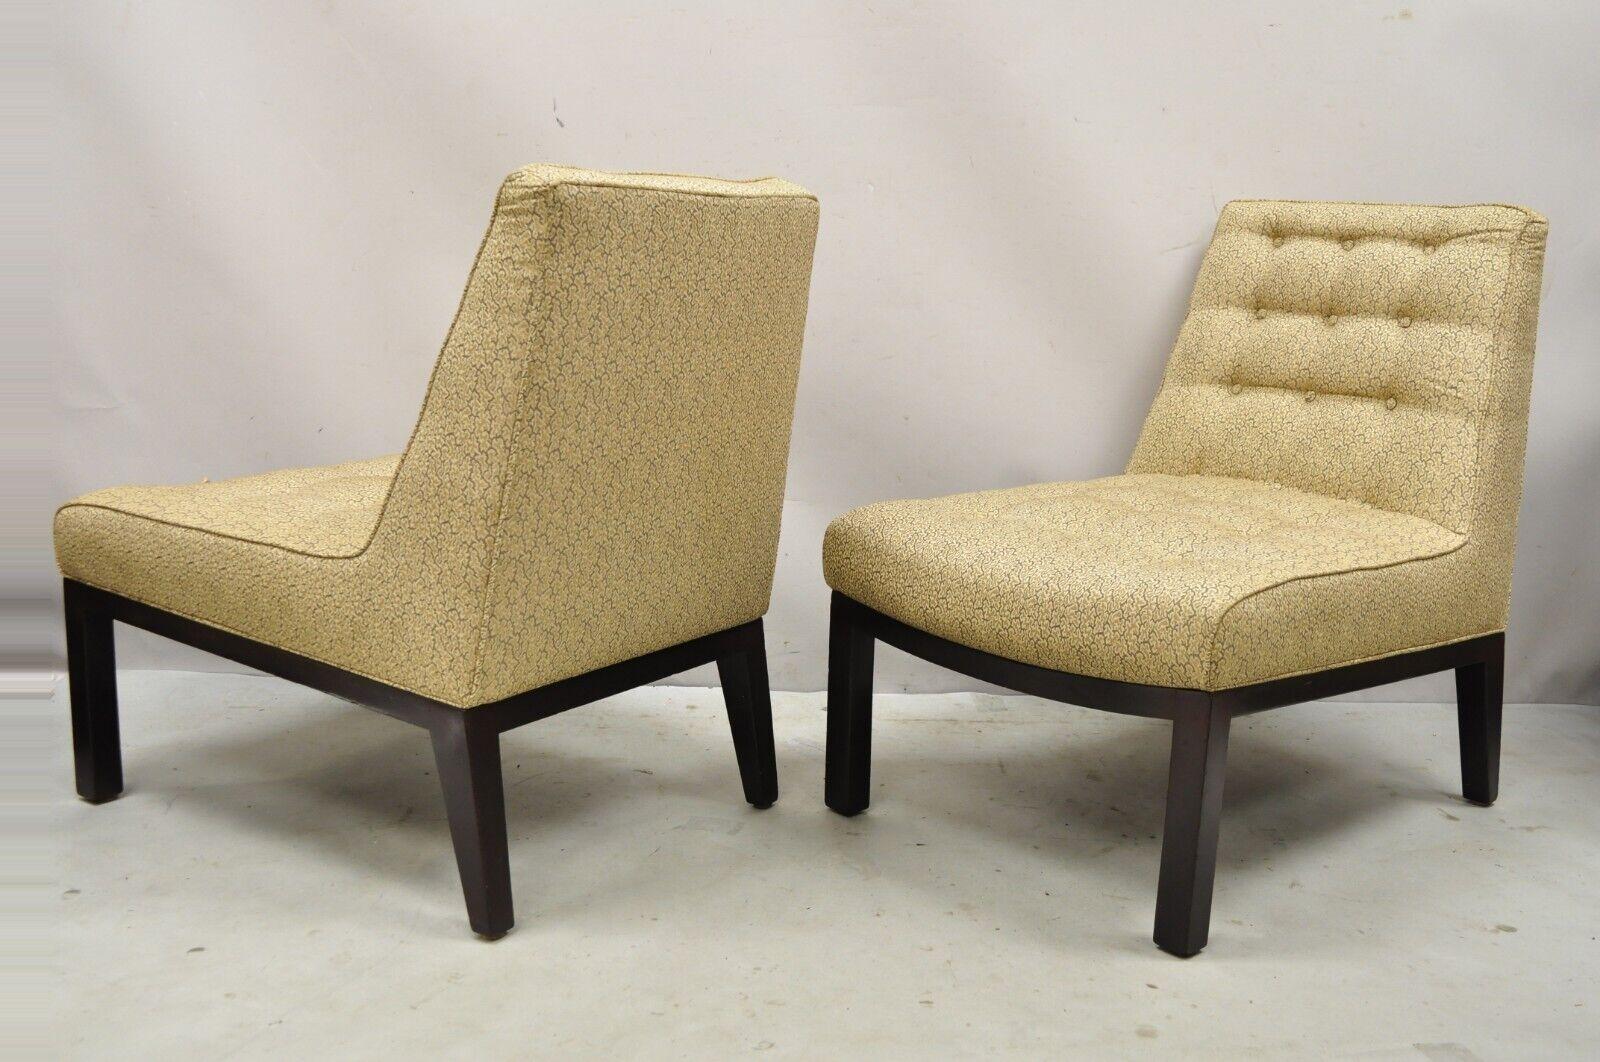 Edward Wormley for Dunbar wood frame slipper lounge chairs - a pair. Item features nice deep frames, solid wood base, tapered and angled backs. Original label, very nice vintage pair, clean modernist lines, great style and form. circa Mid-20th